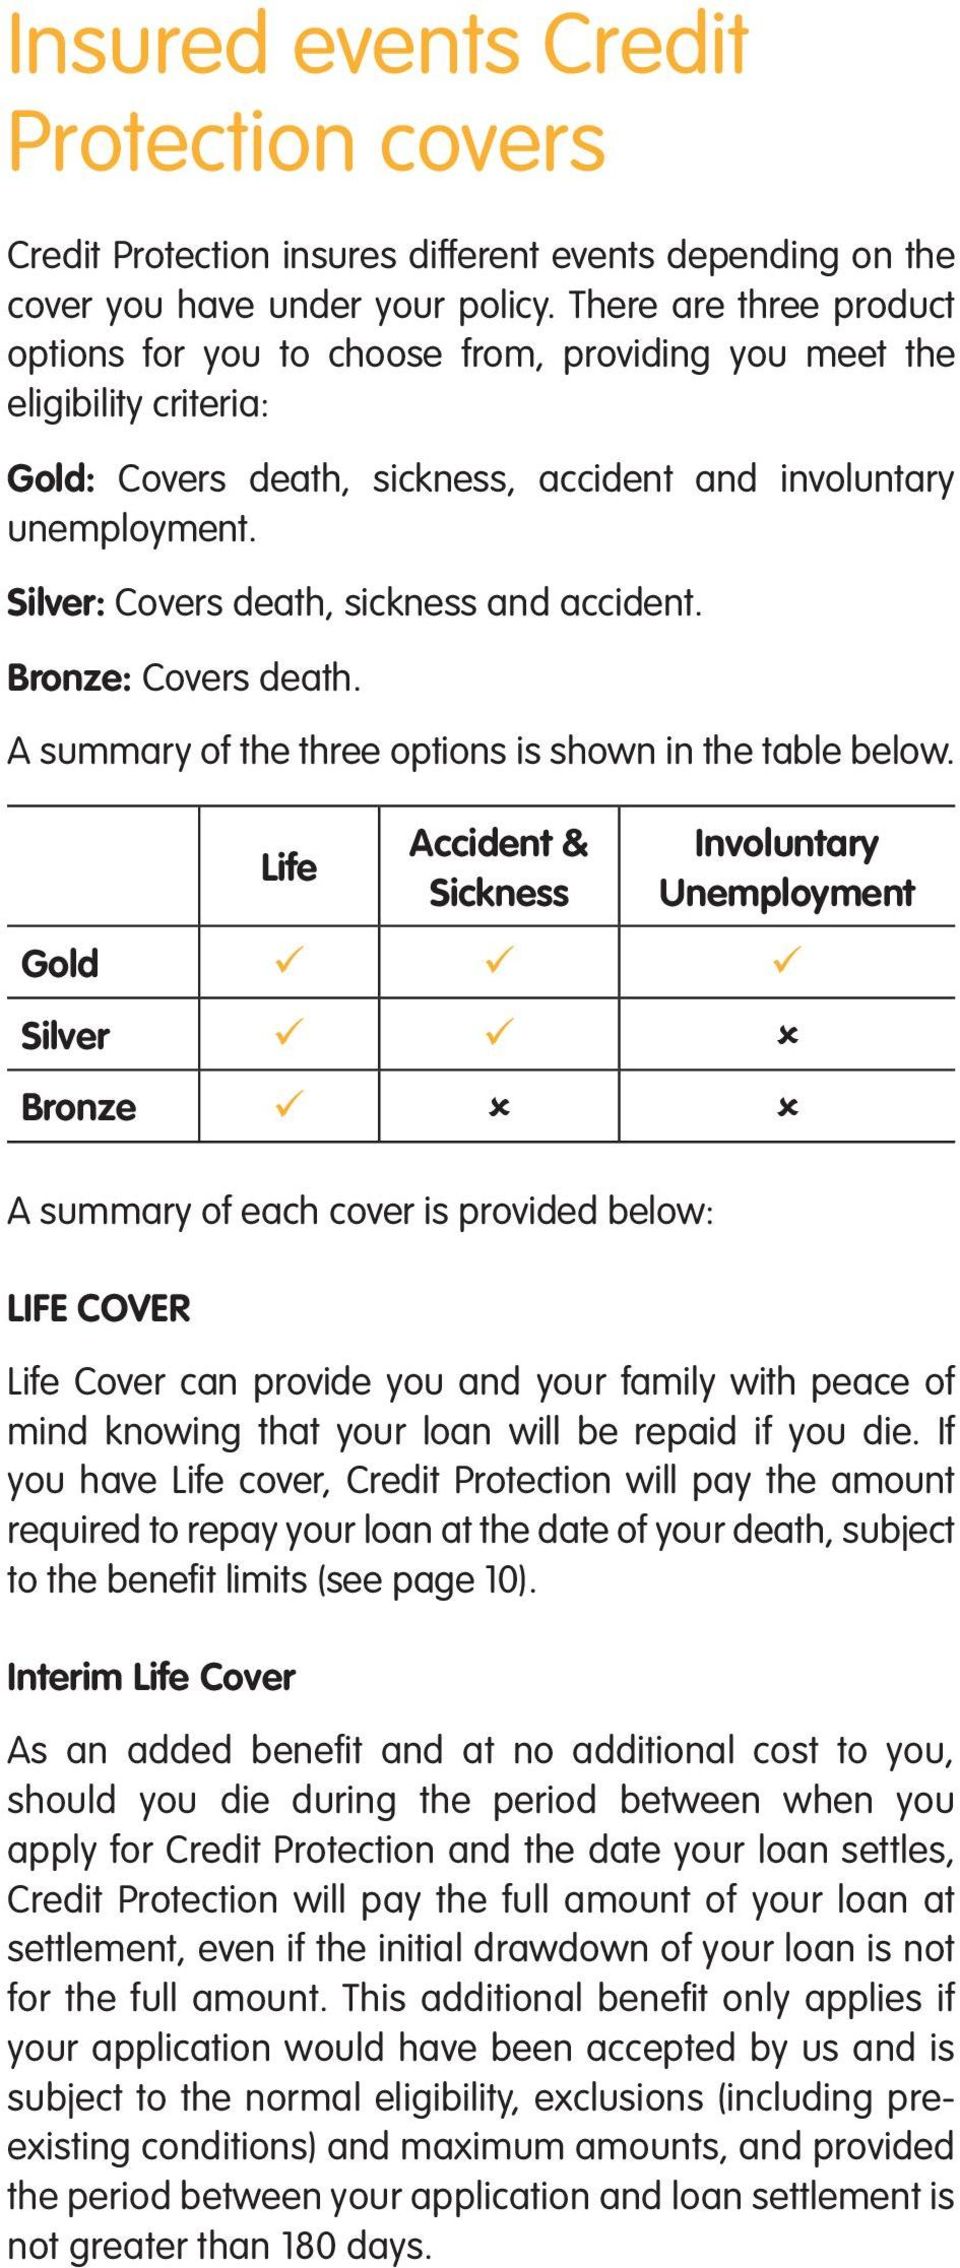 Silver: Covers death, sickness and accident. Bronze: Covers death. A summary of the three options is shown in the table below.